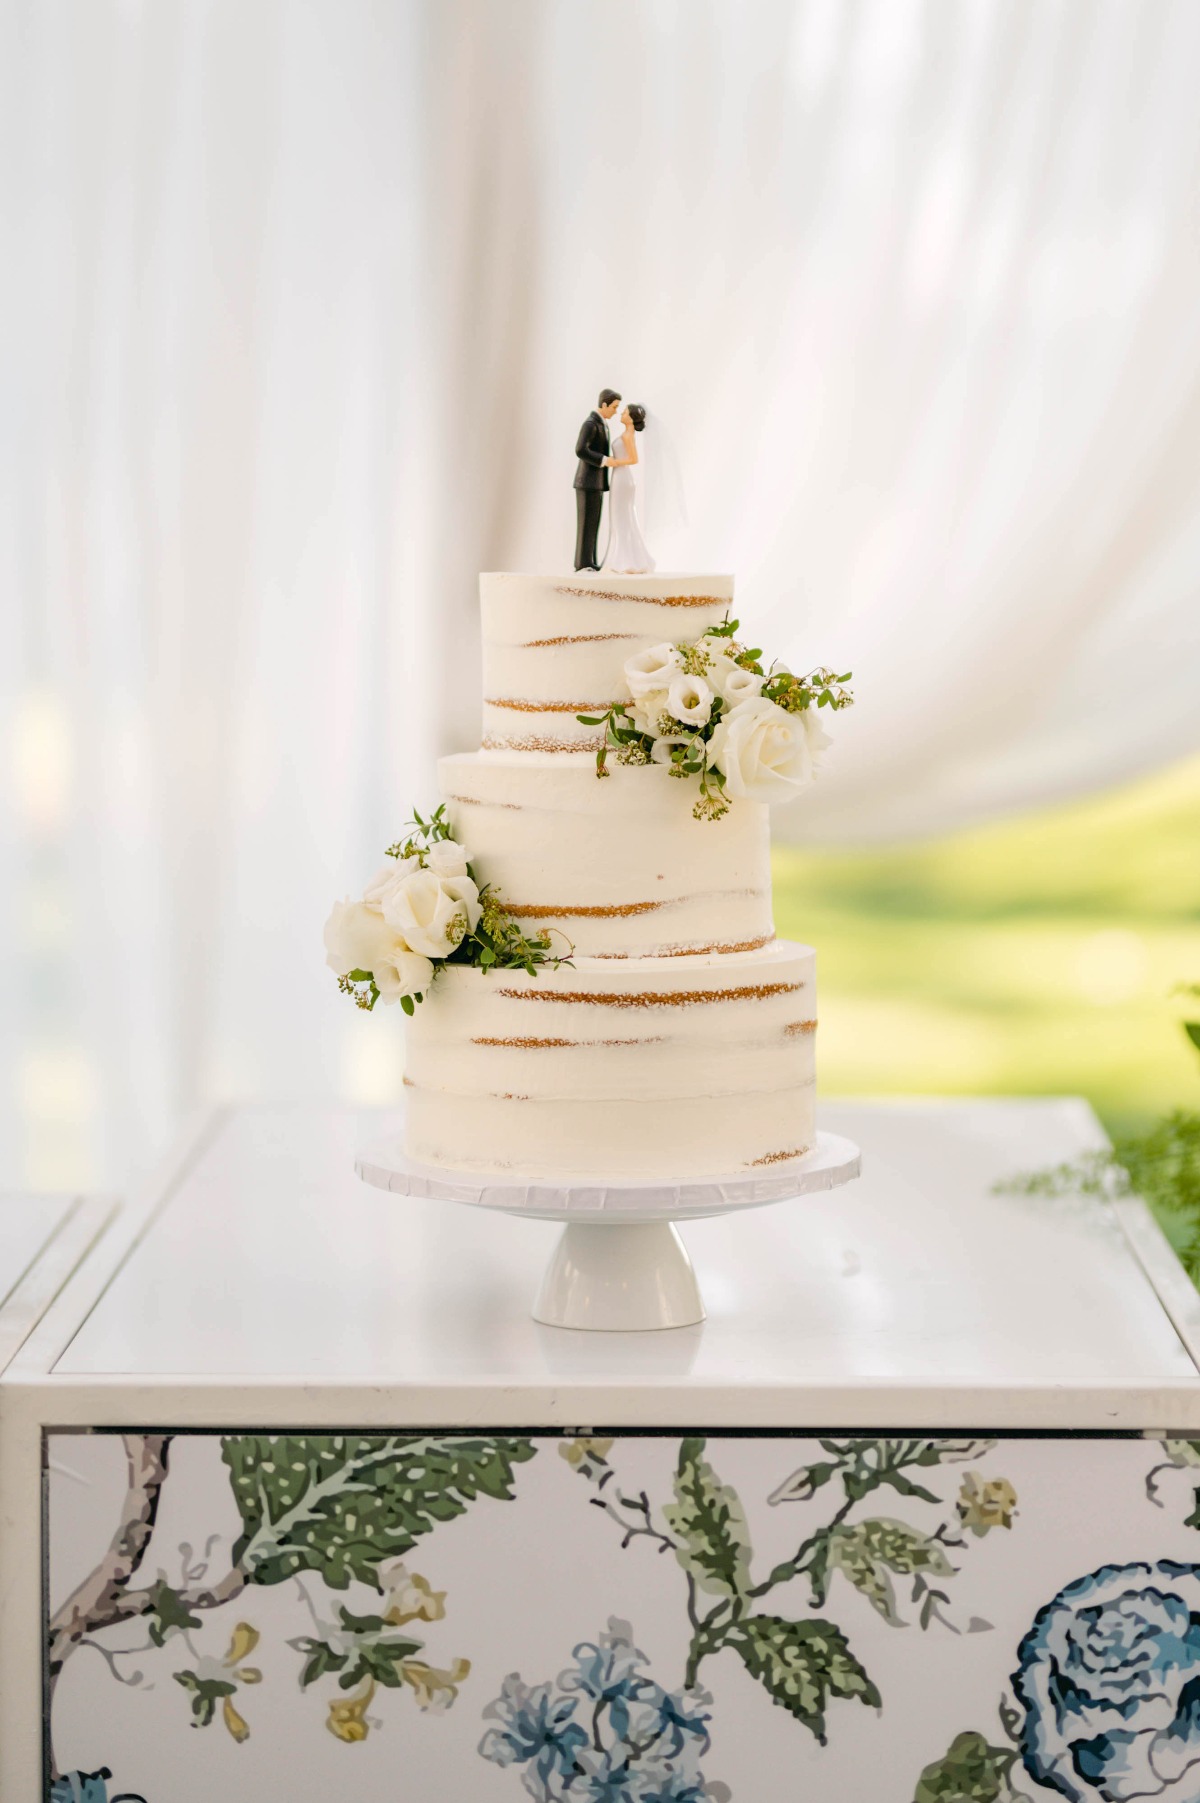 Naked cake on floral cake stand 